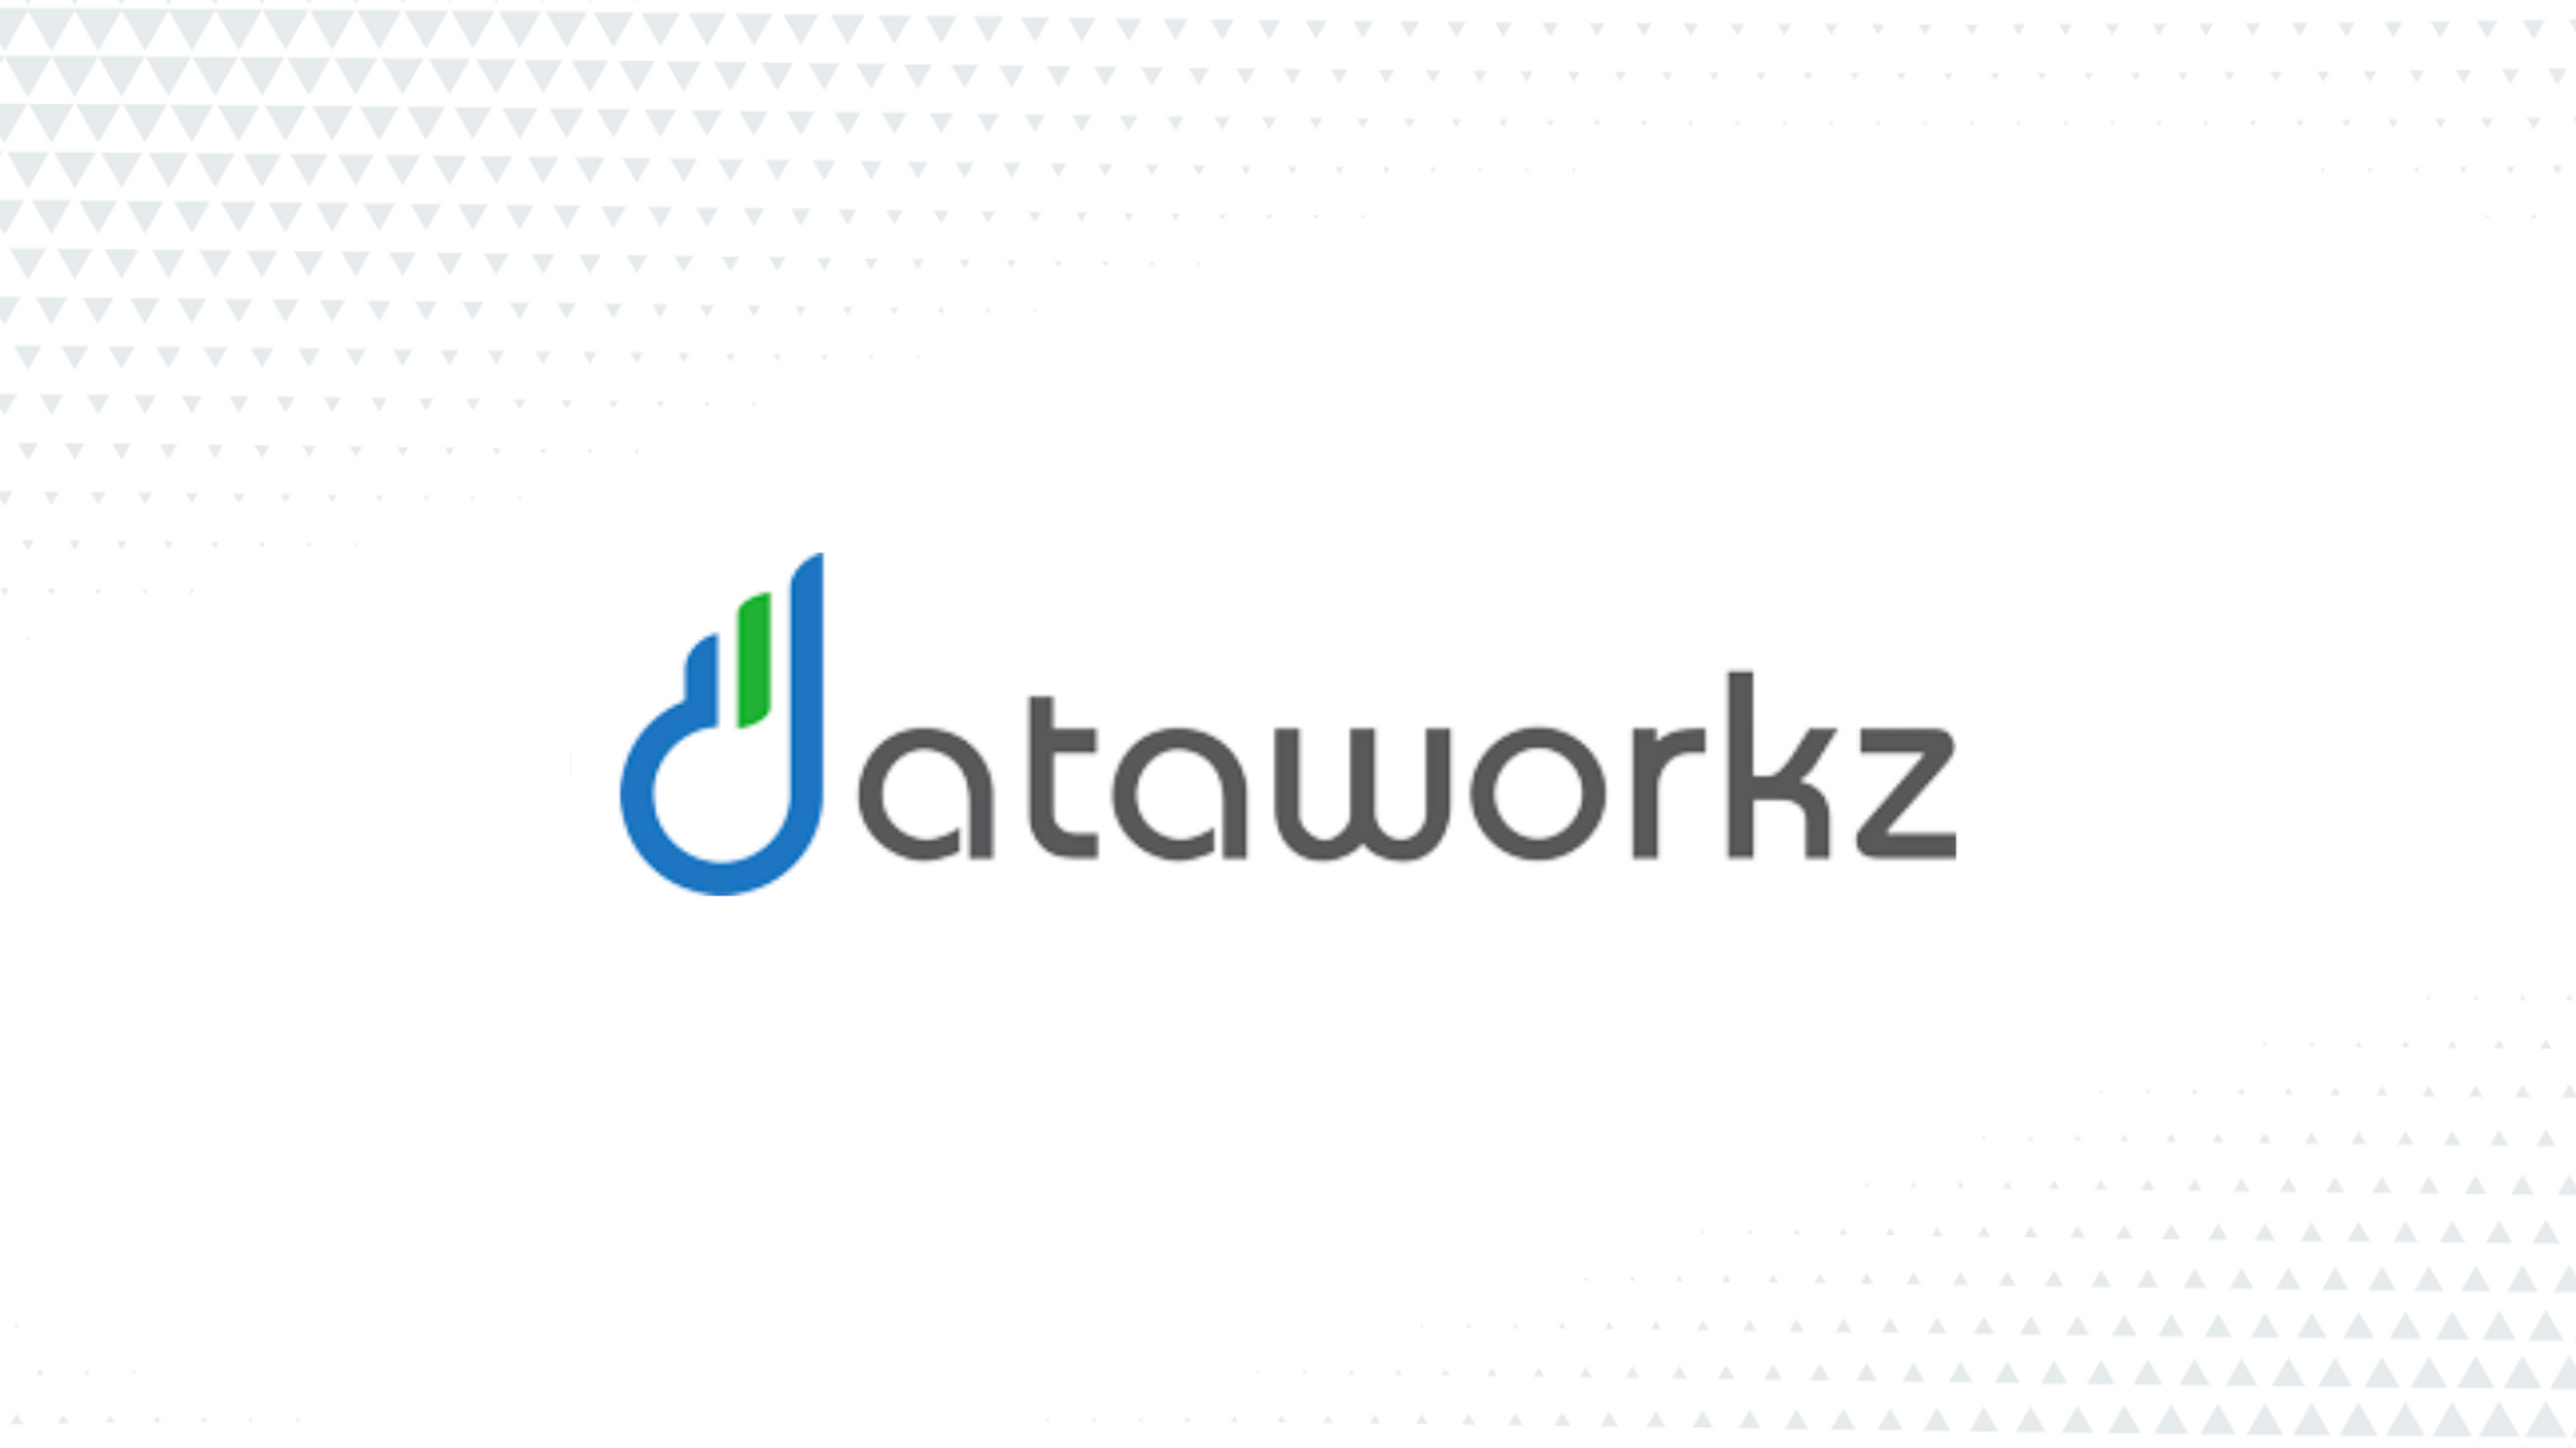 Dataworkz: Enabling Customer 360 in Minutes with Vector Search and LLMs